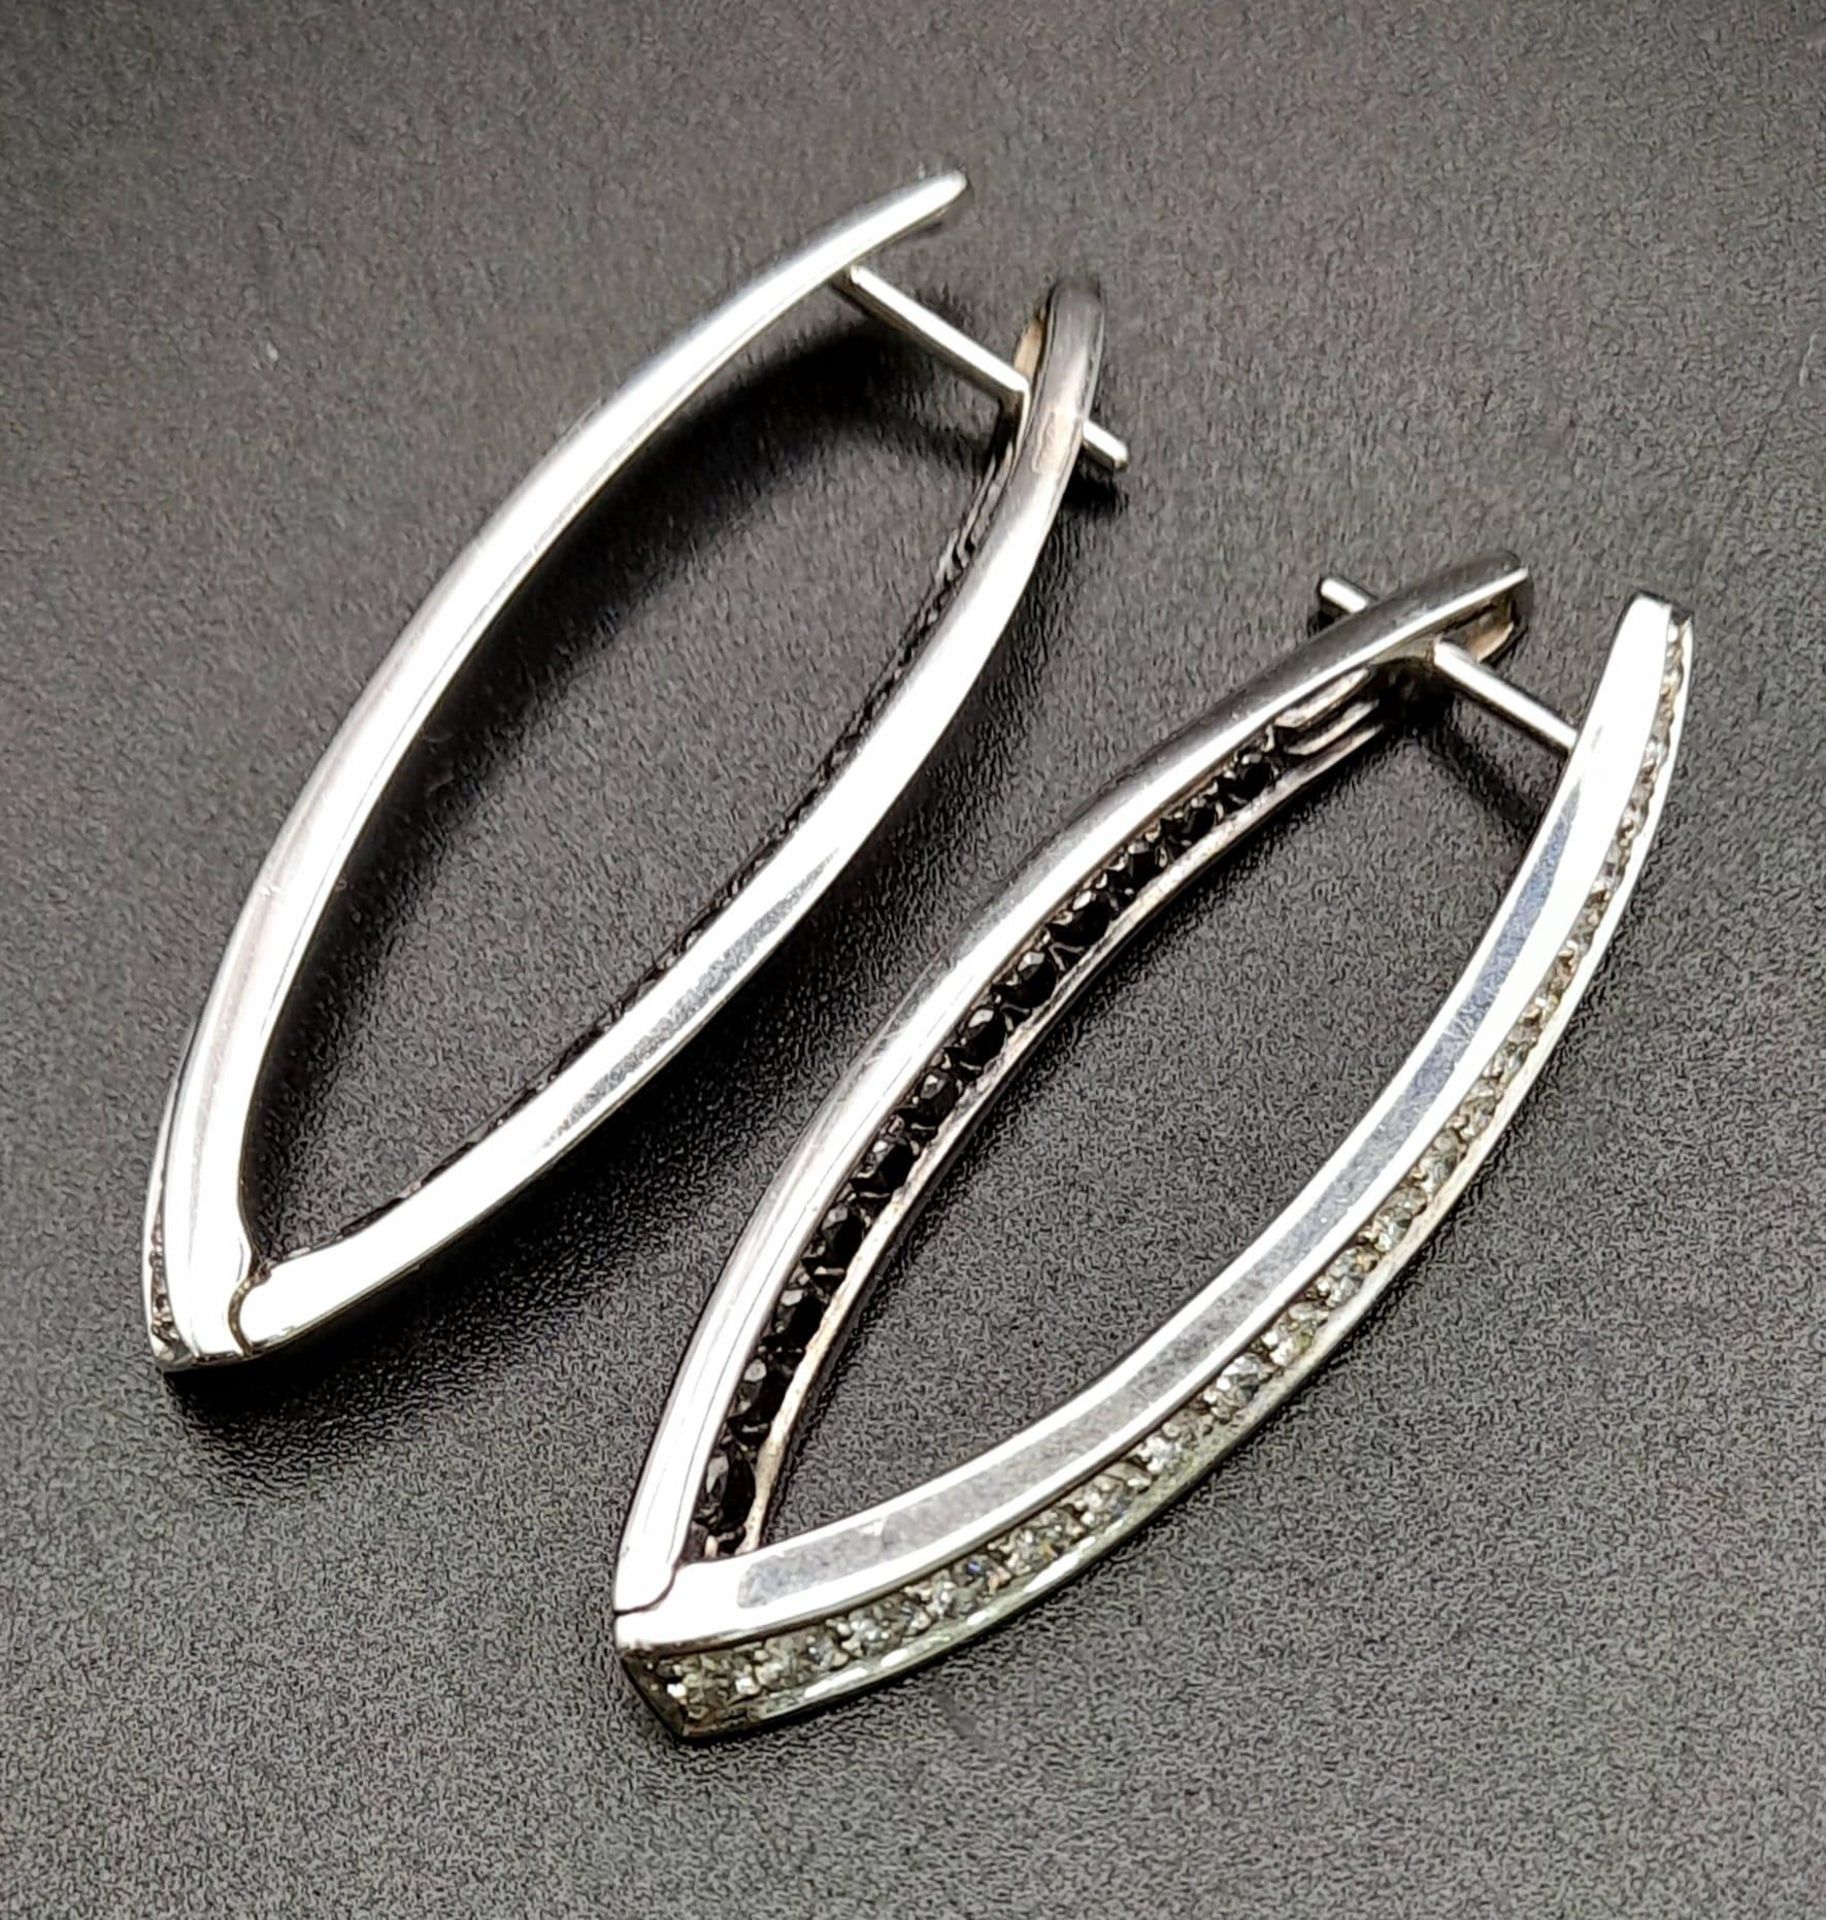 A Pair of Designer Palmiero 18K White Gold, Black and White Diamond Elongated Hoop Earrings. 0. - Image 5 of 9